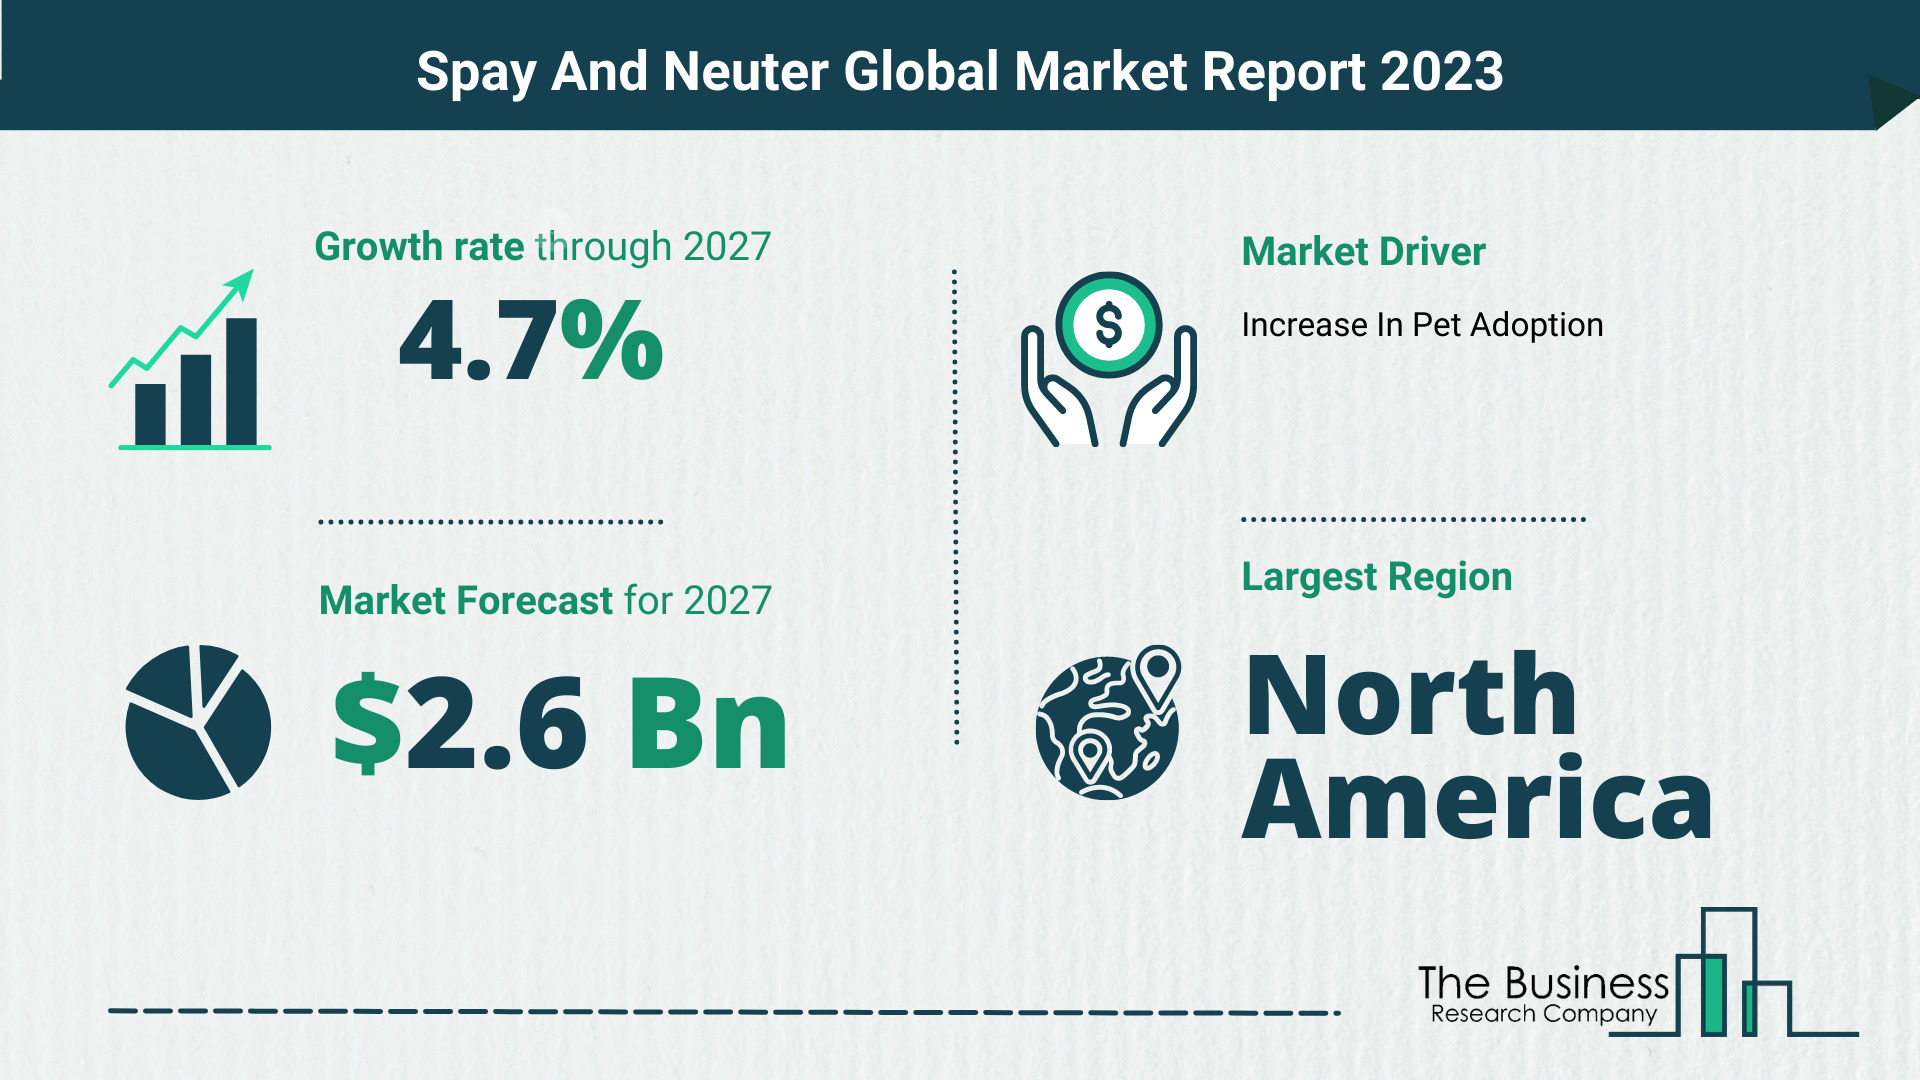 Global Spay And Neuter Market